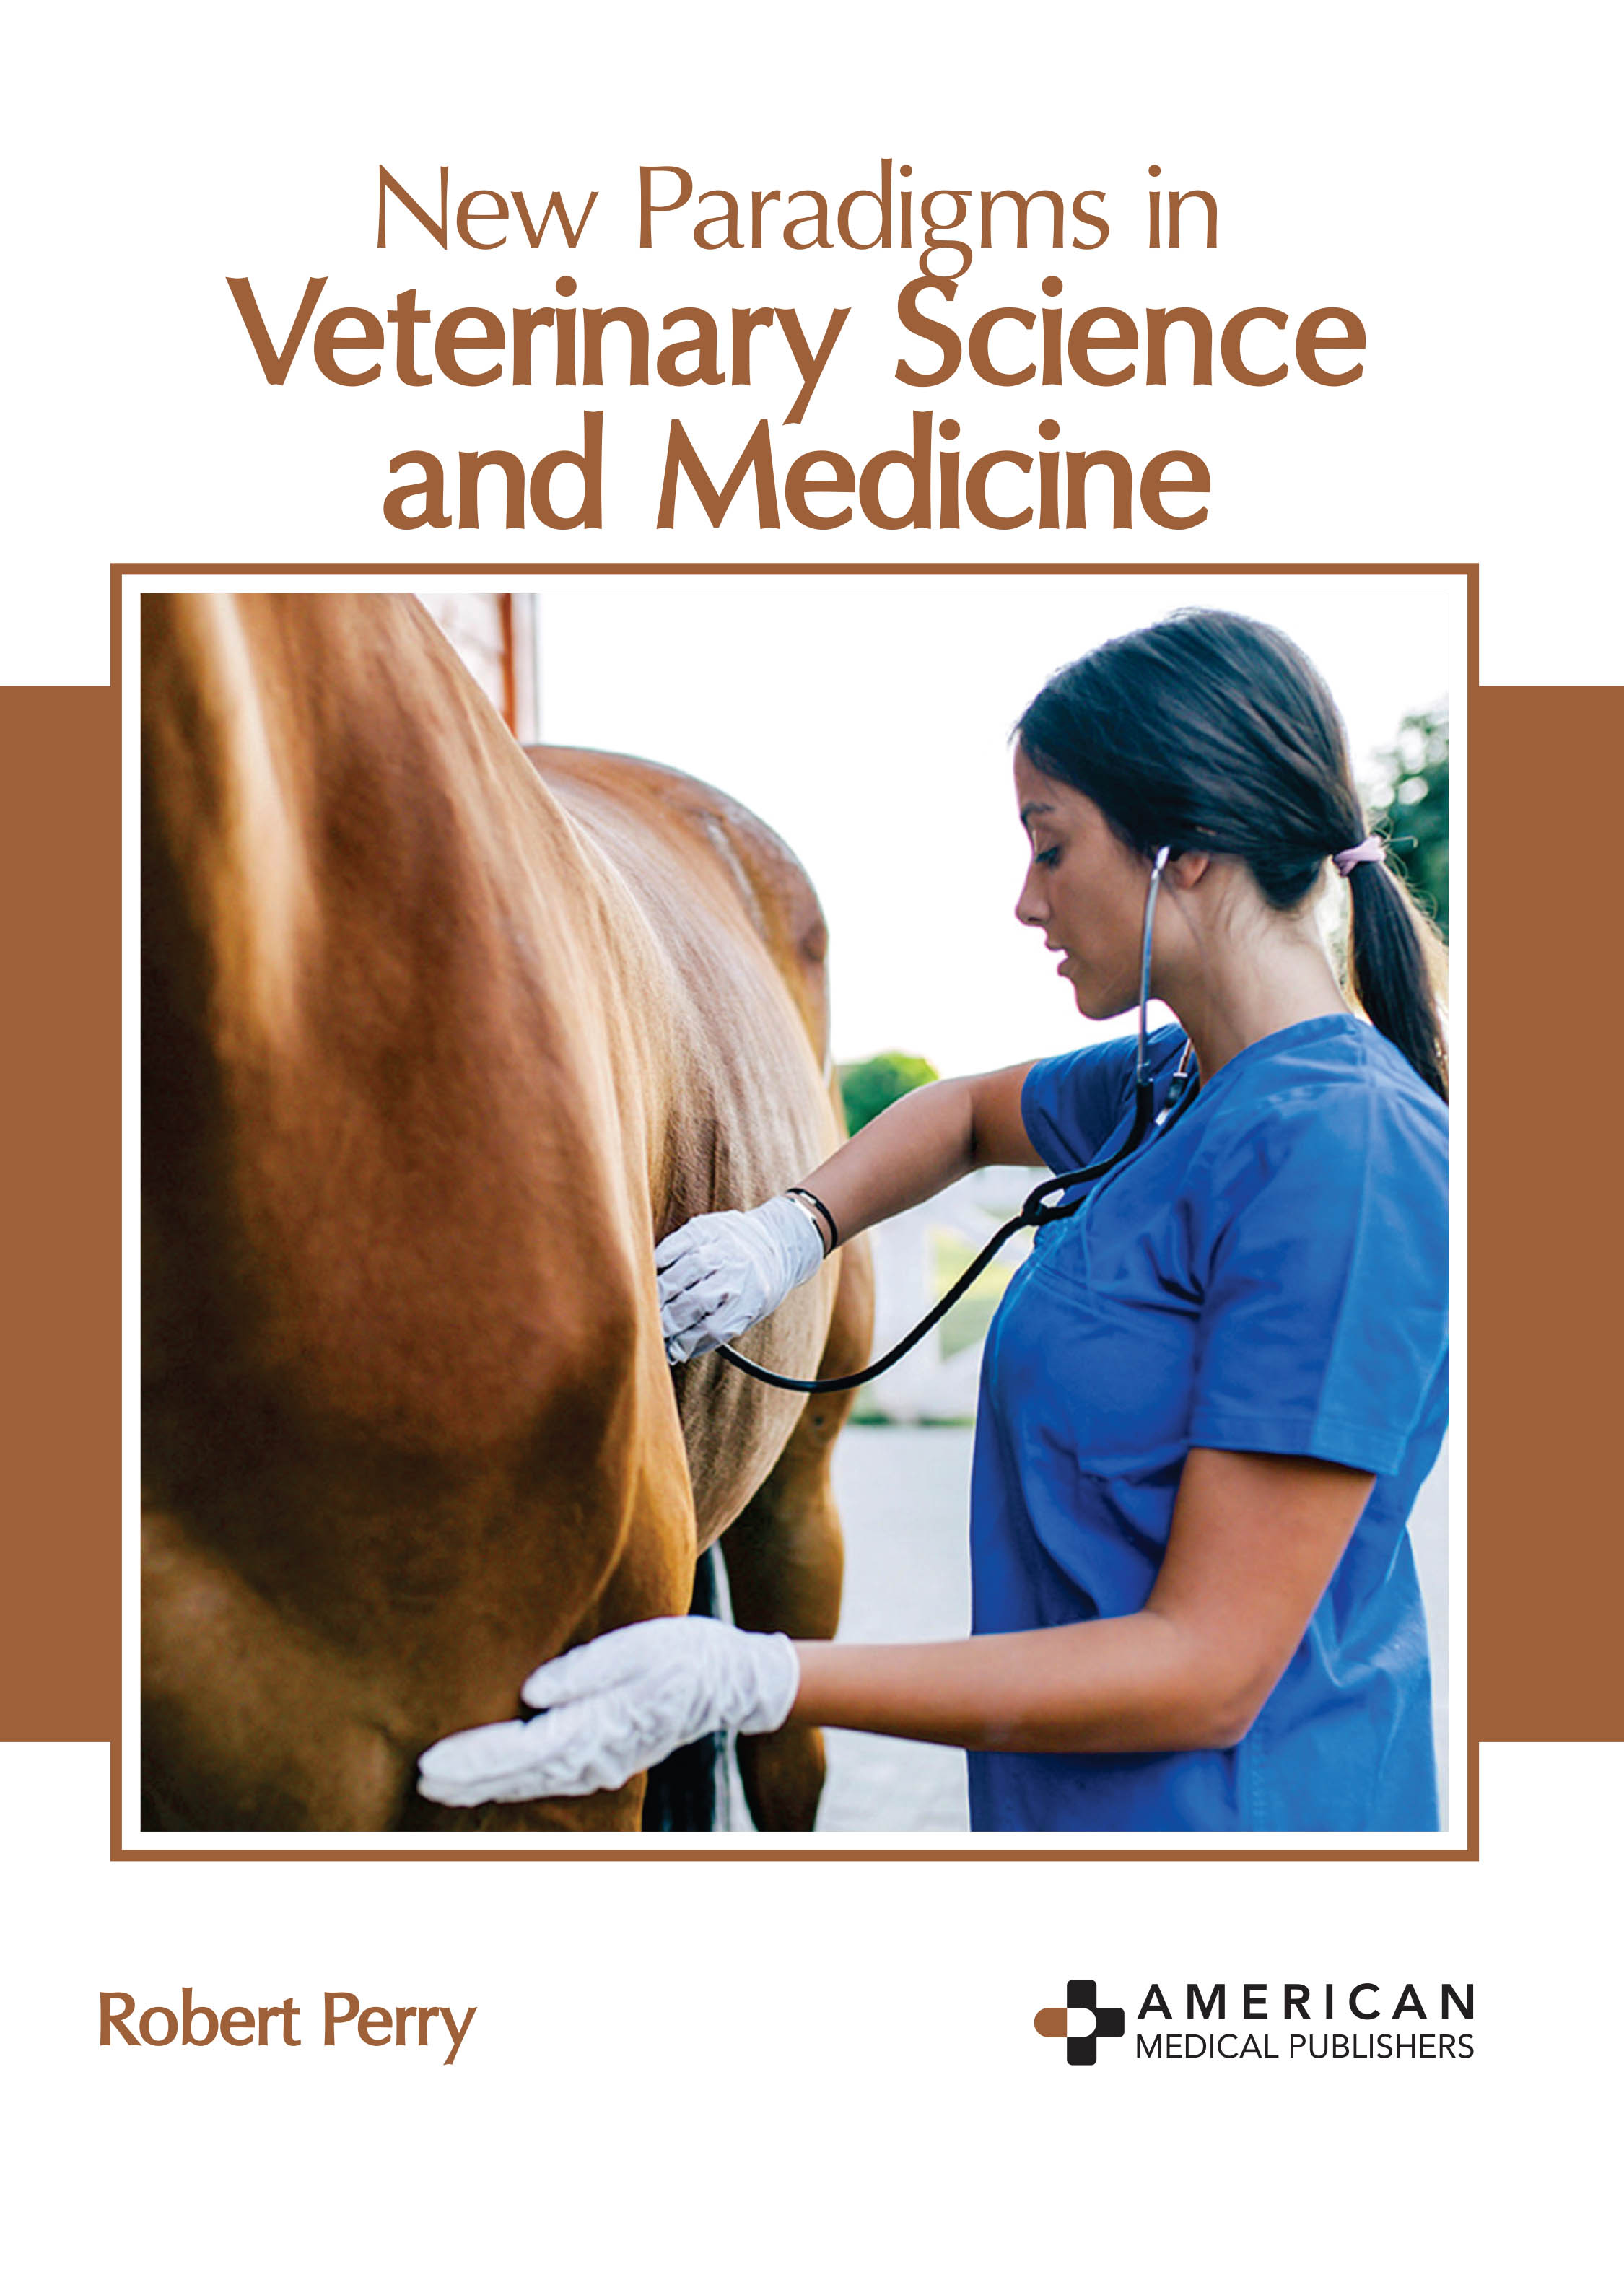 
exclusive-publishers/american-medical-publishers/new-paradigms-in-veterinary-science-and-medicine-9781639275229